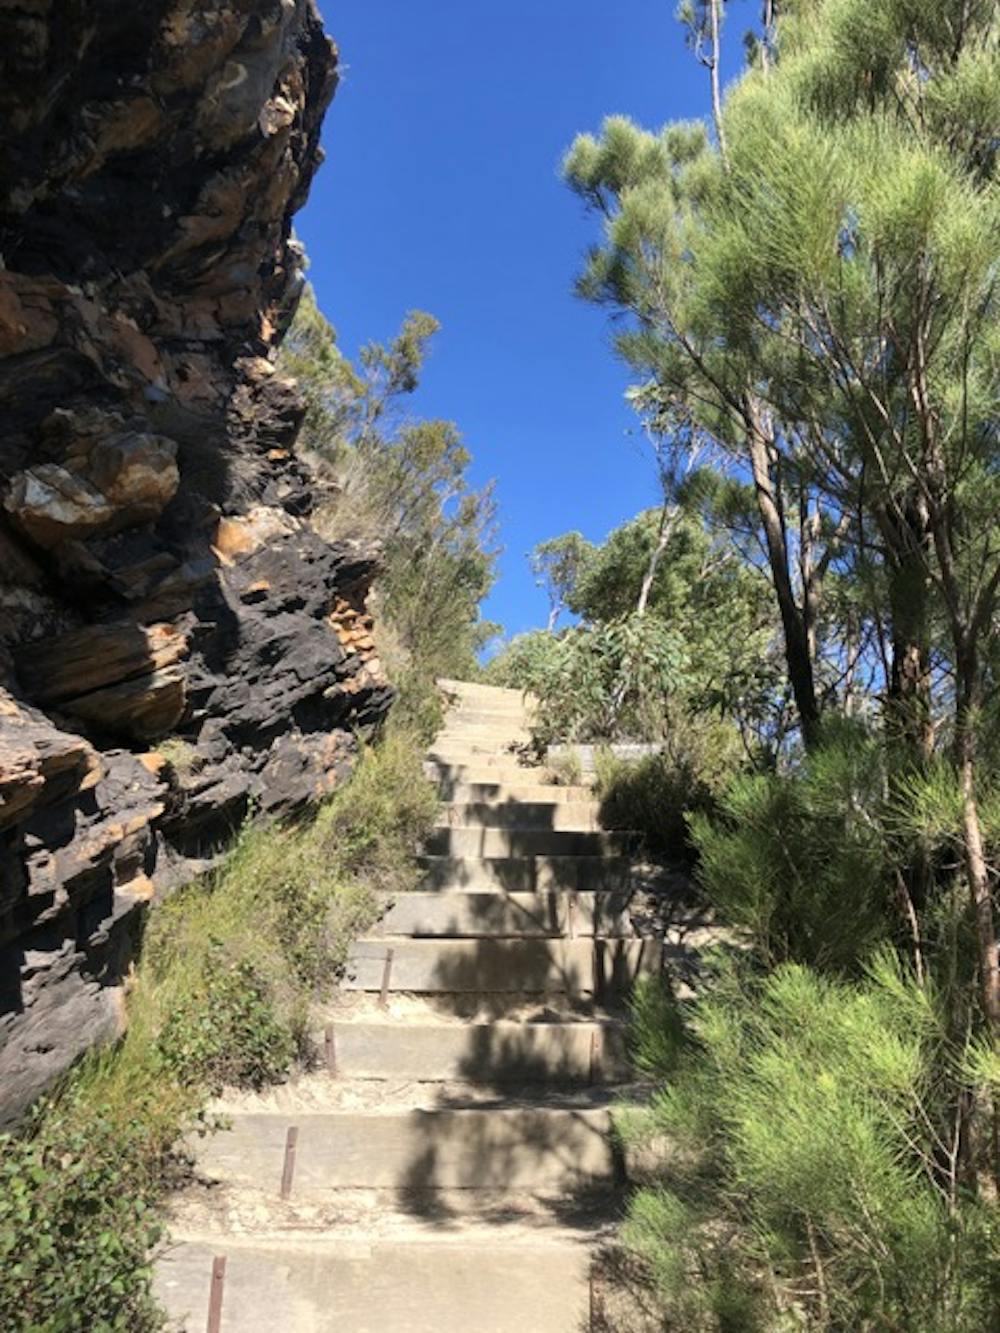 Bluff Knoll track - timber-reinforced steps